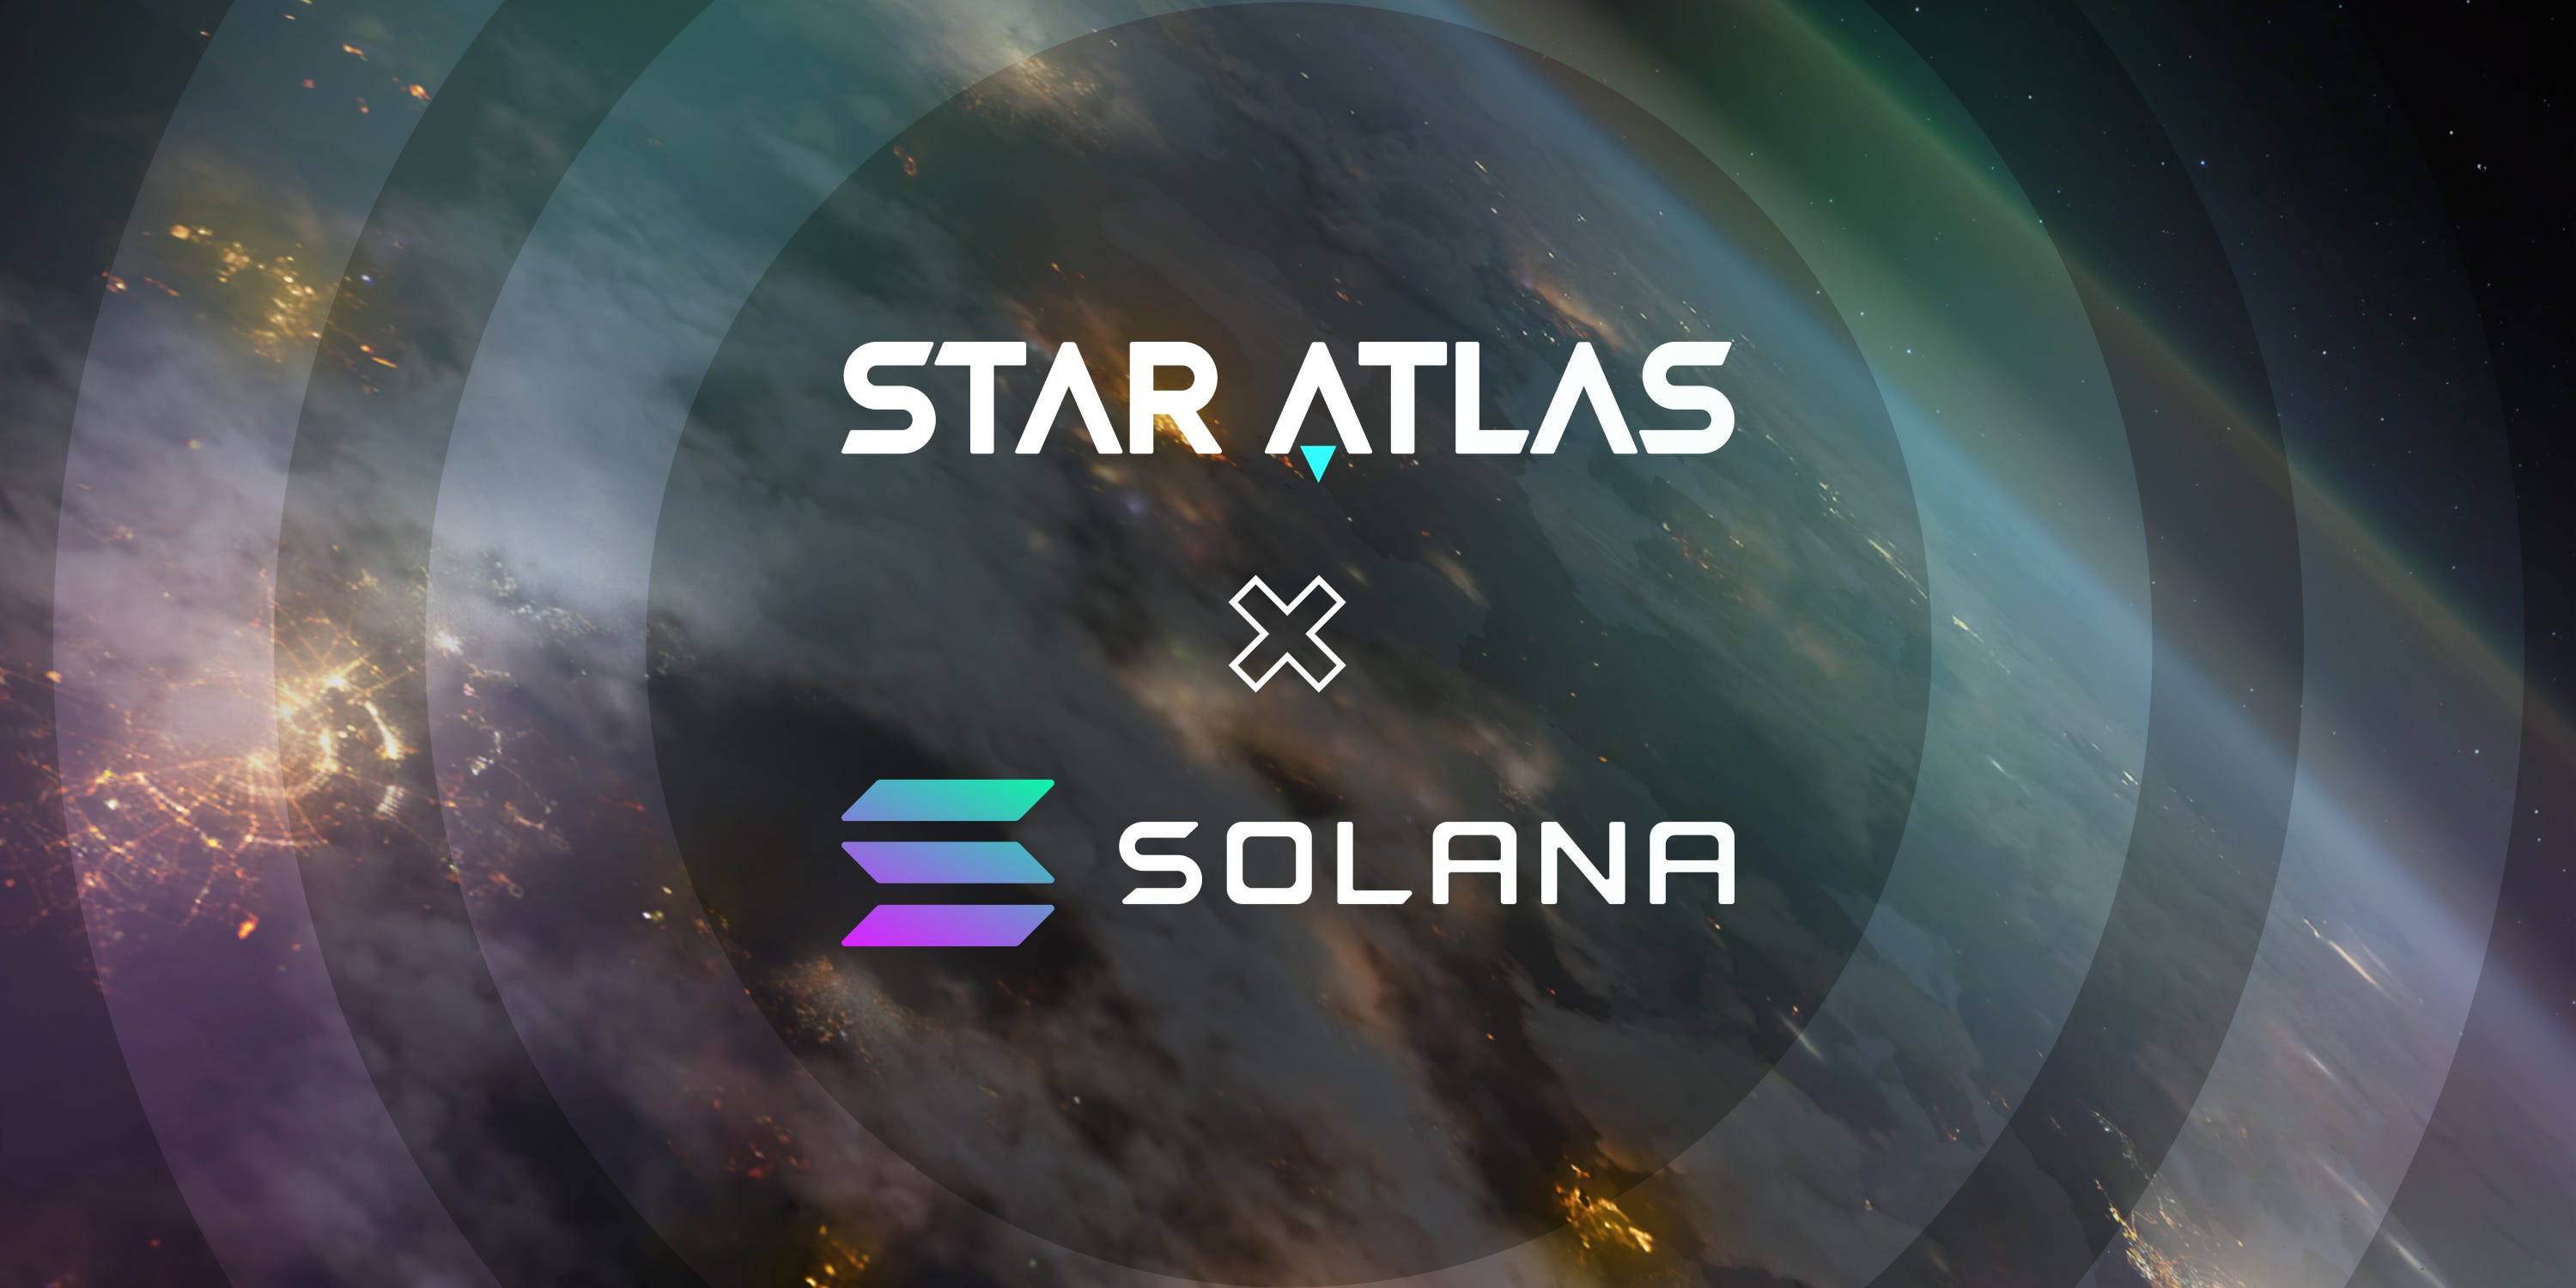 Star Atlas Disrupts The Gaming Industry By Integrating With Solana To Develop The Future Of Blockchain Driven Metaverse Gaming Experiences By Star Atlas Star Atlas Medium